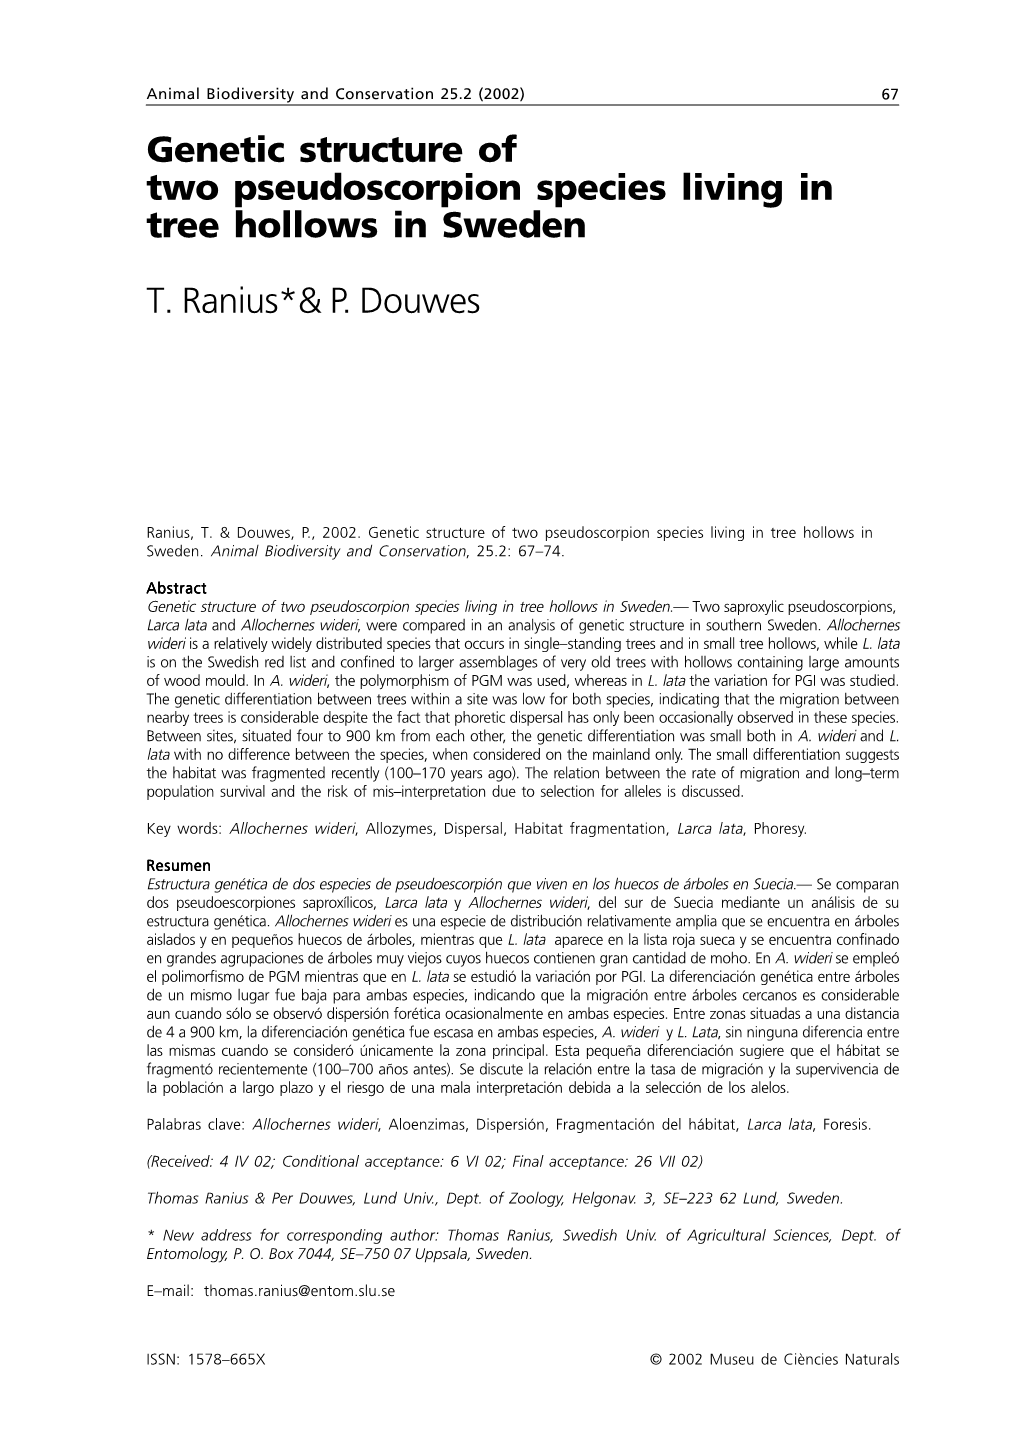 Genetic Structure of Two Pseudoscorpion Species Living in Tree Hollows in Sweden